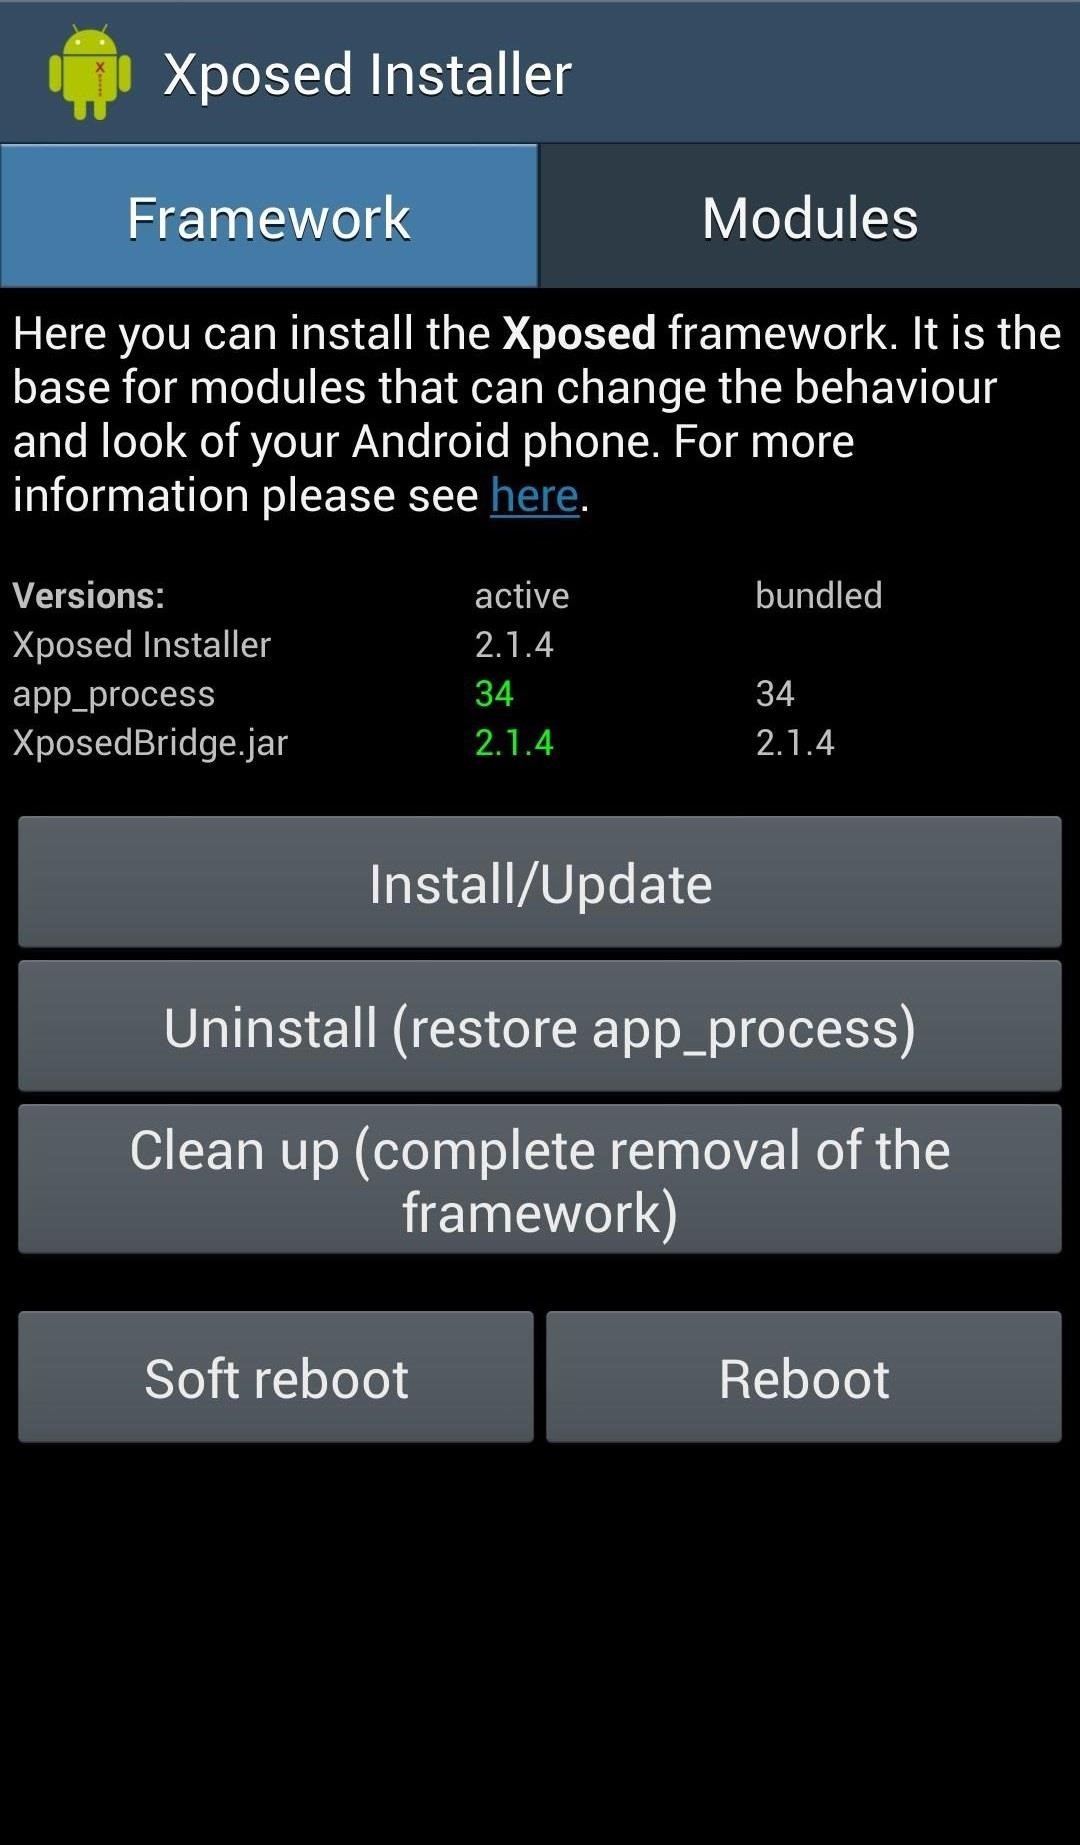 How to Patch the Latest Android "Master Key" Bugs on Your Samsung Galaxy S3